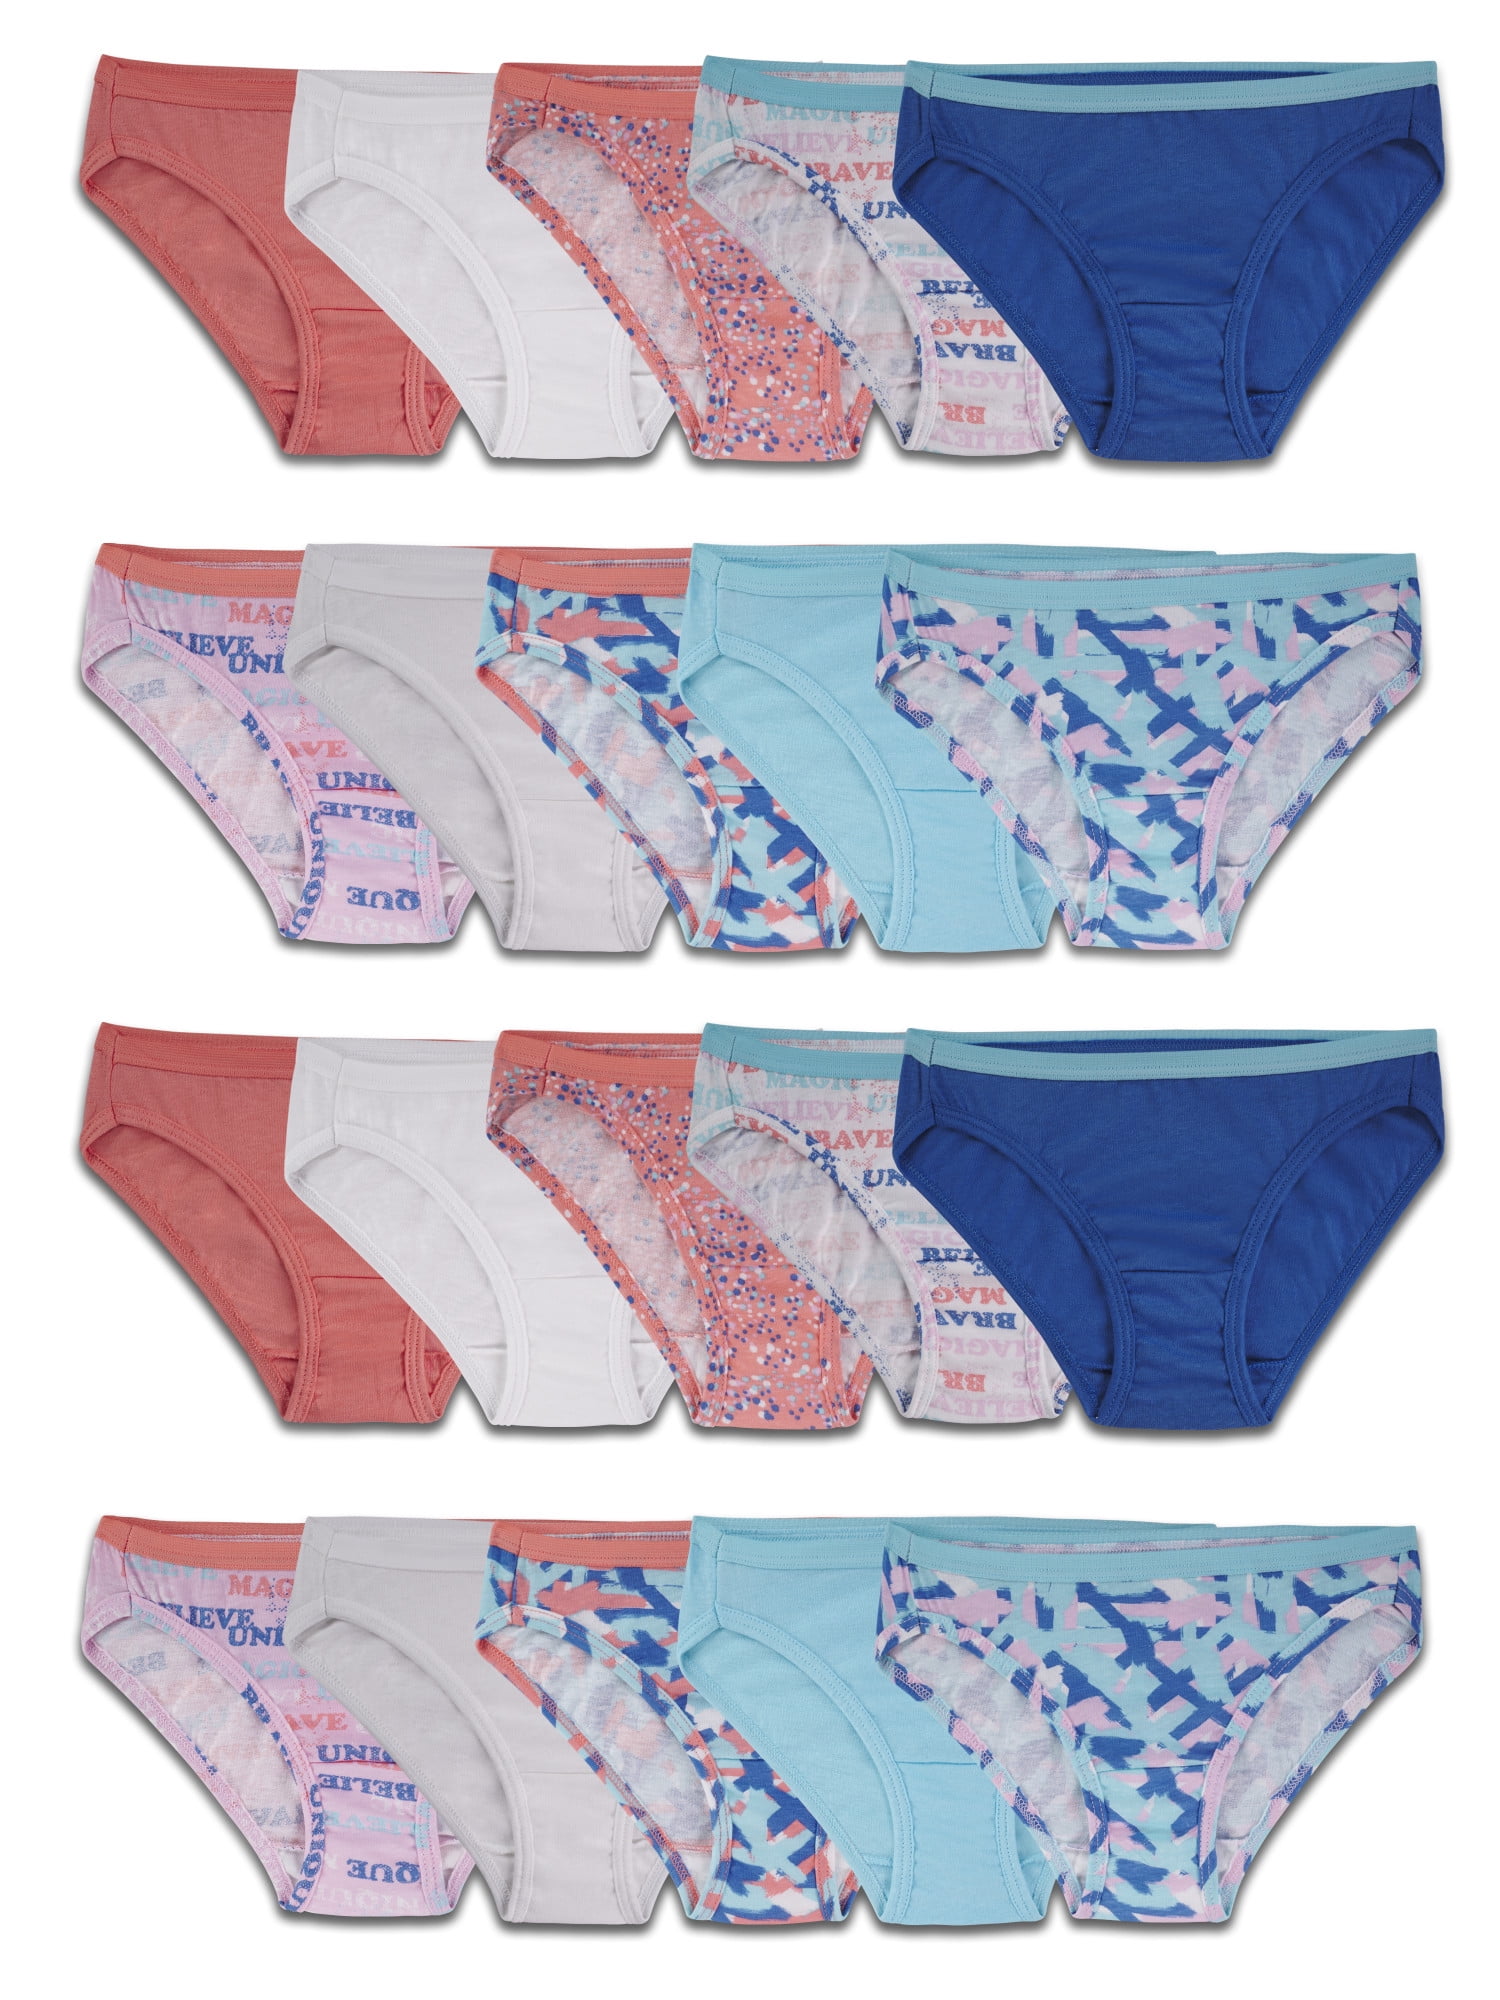 NWTS~12 PACK GIRLS FRUIT OF THE  LOOM COTTON HIPSTERS/ BIKINI UNDERWEAR CUTE 